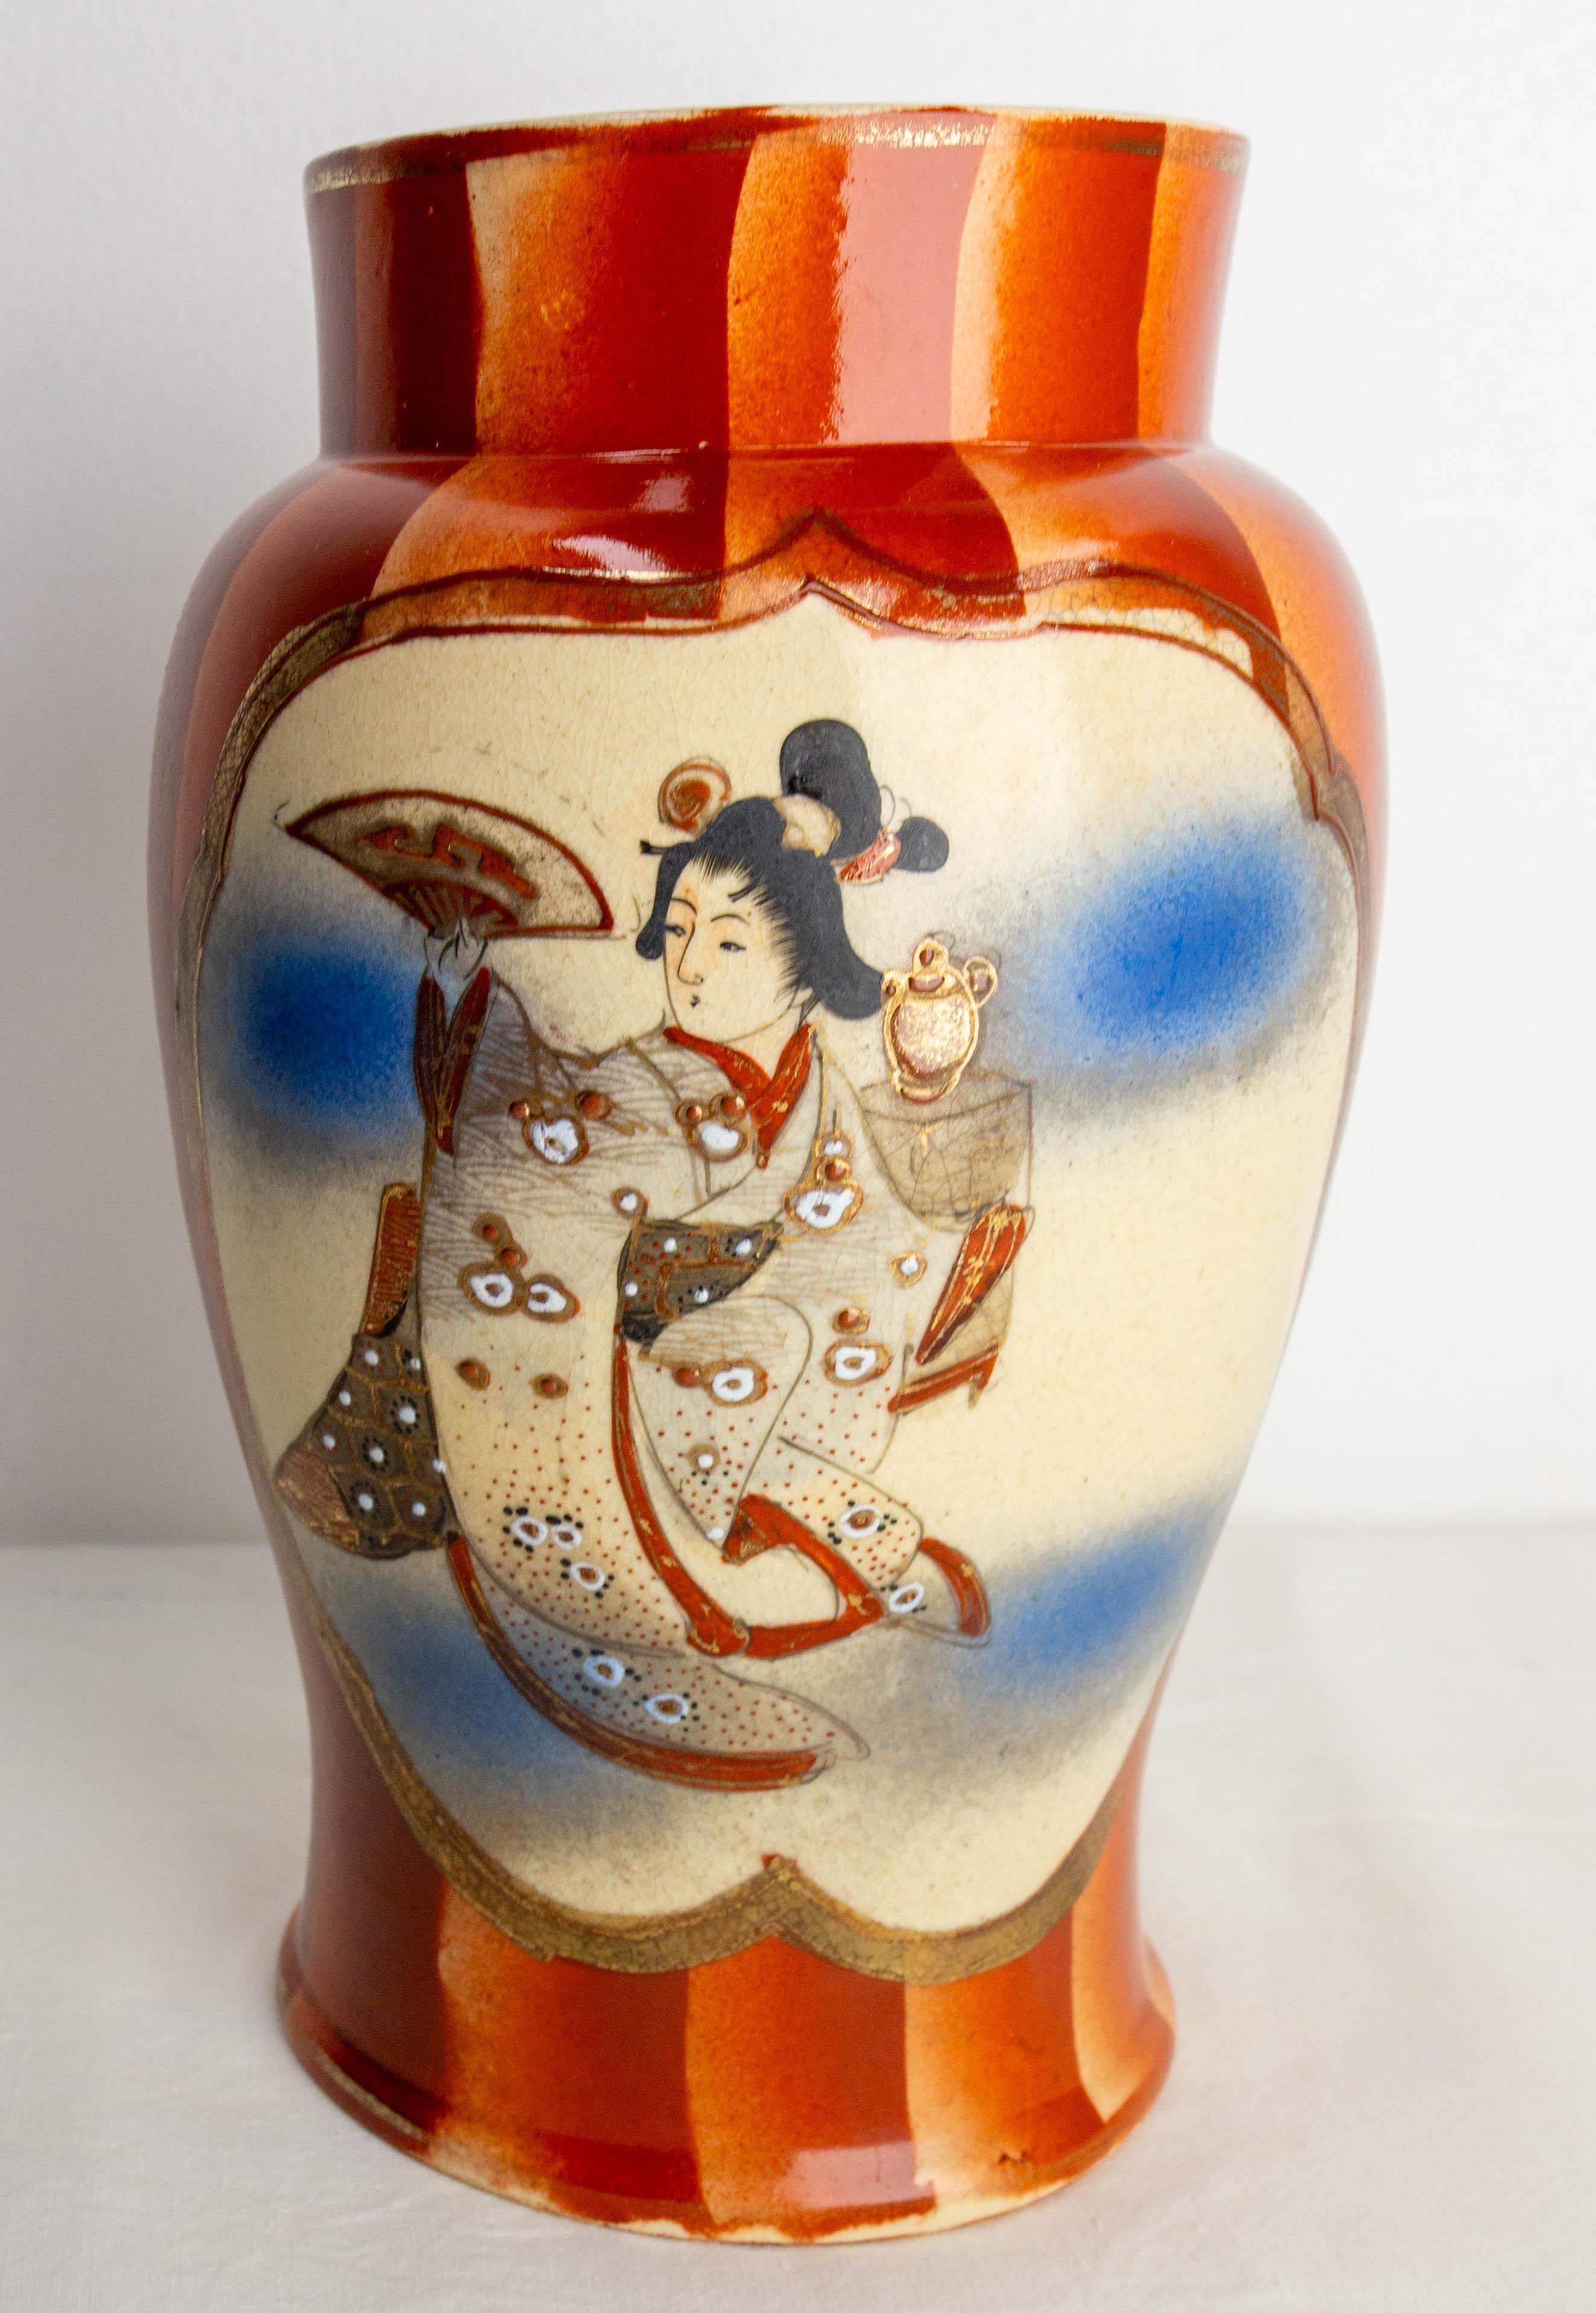 French vintage vase typical of traditional japanese culture
Ceramic decorated with a geisha holding a fan on one side and with flowering cherry branches and a butterfly.
Made circa 1960
Good condition.

Shipping:
Diam 16 H 24.5 cm 1.1 kg.